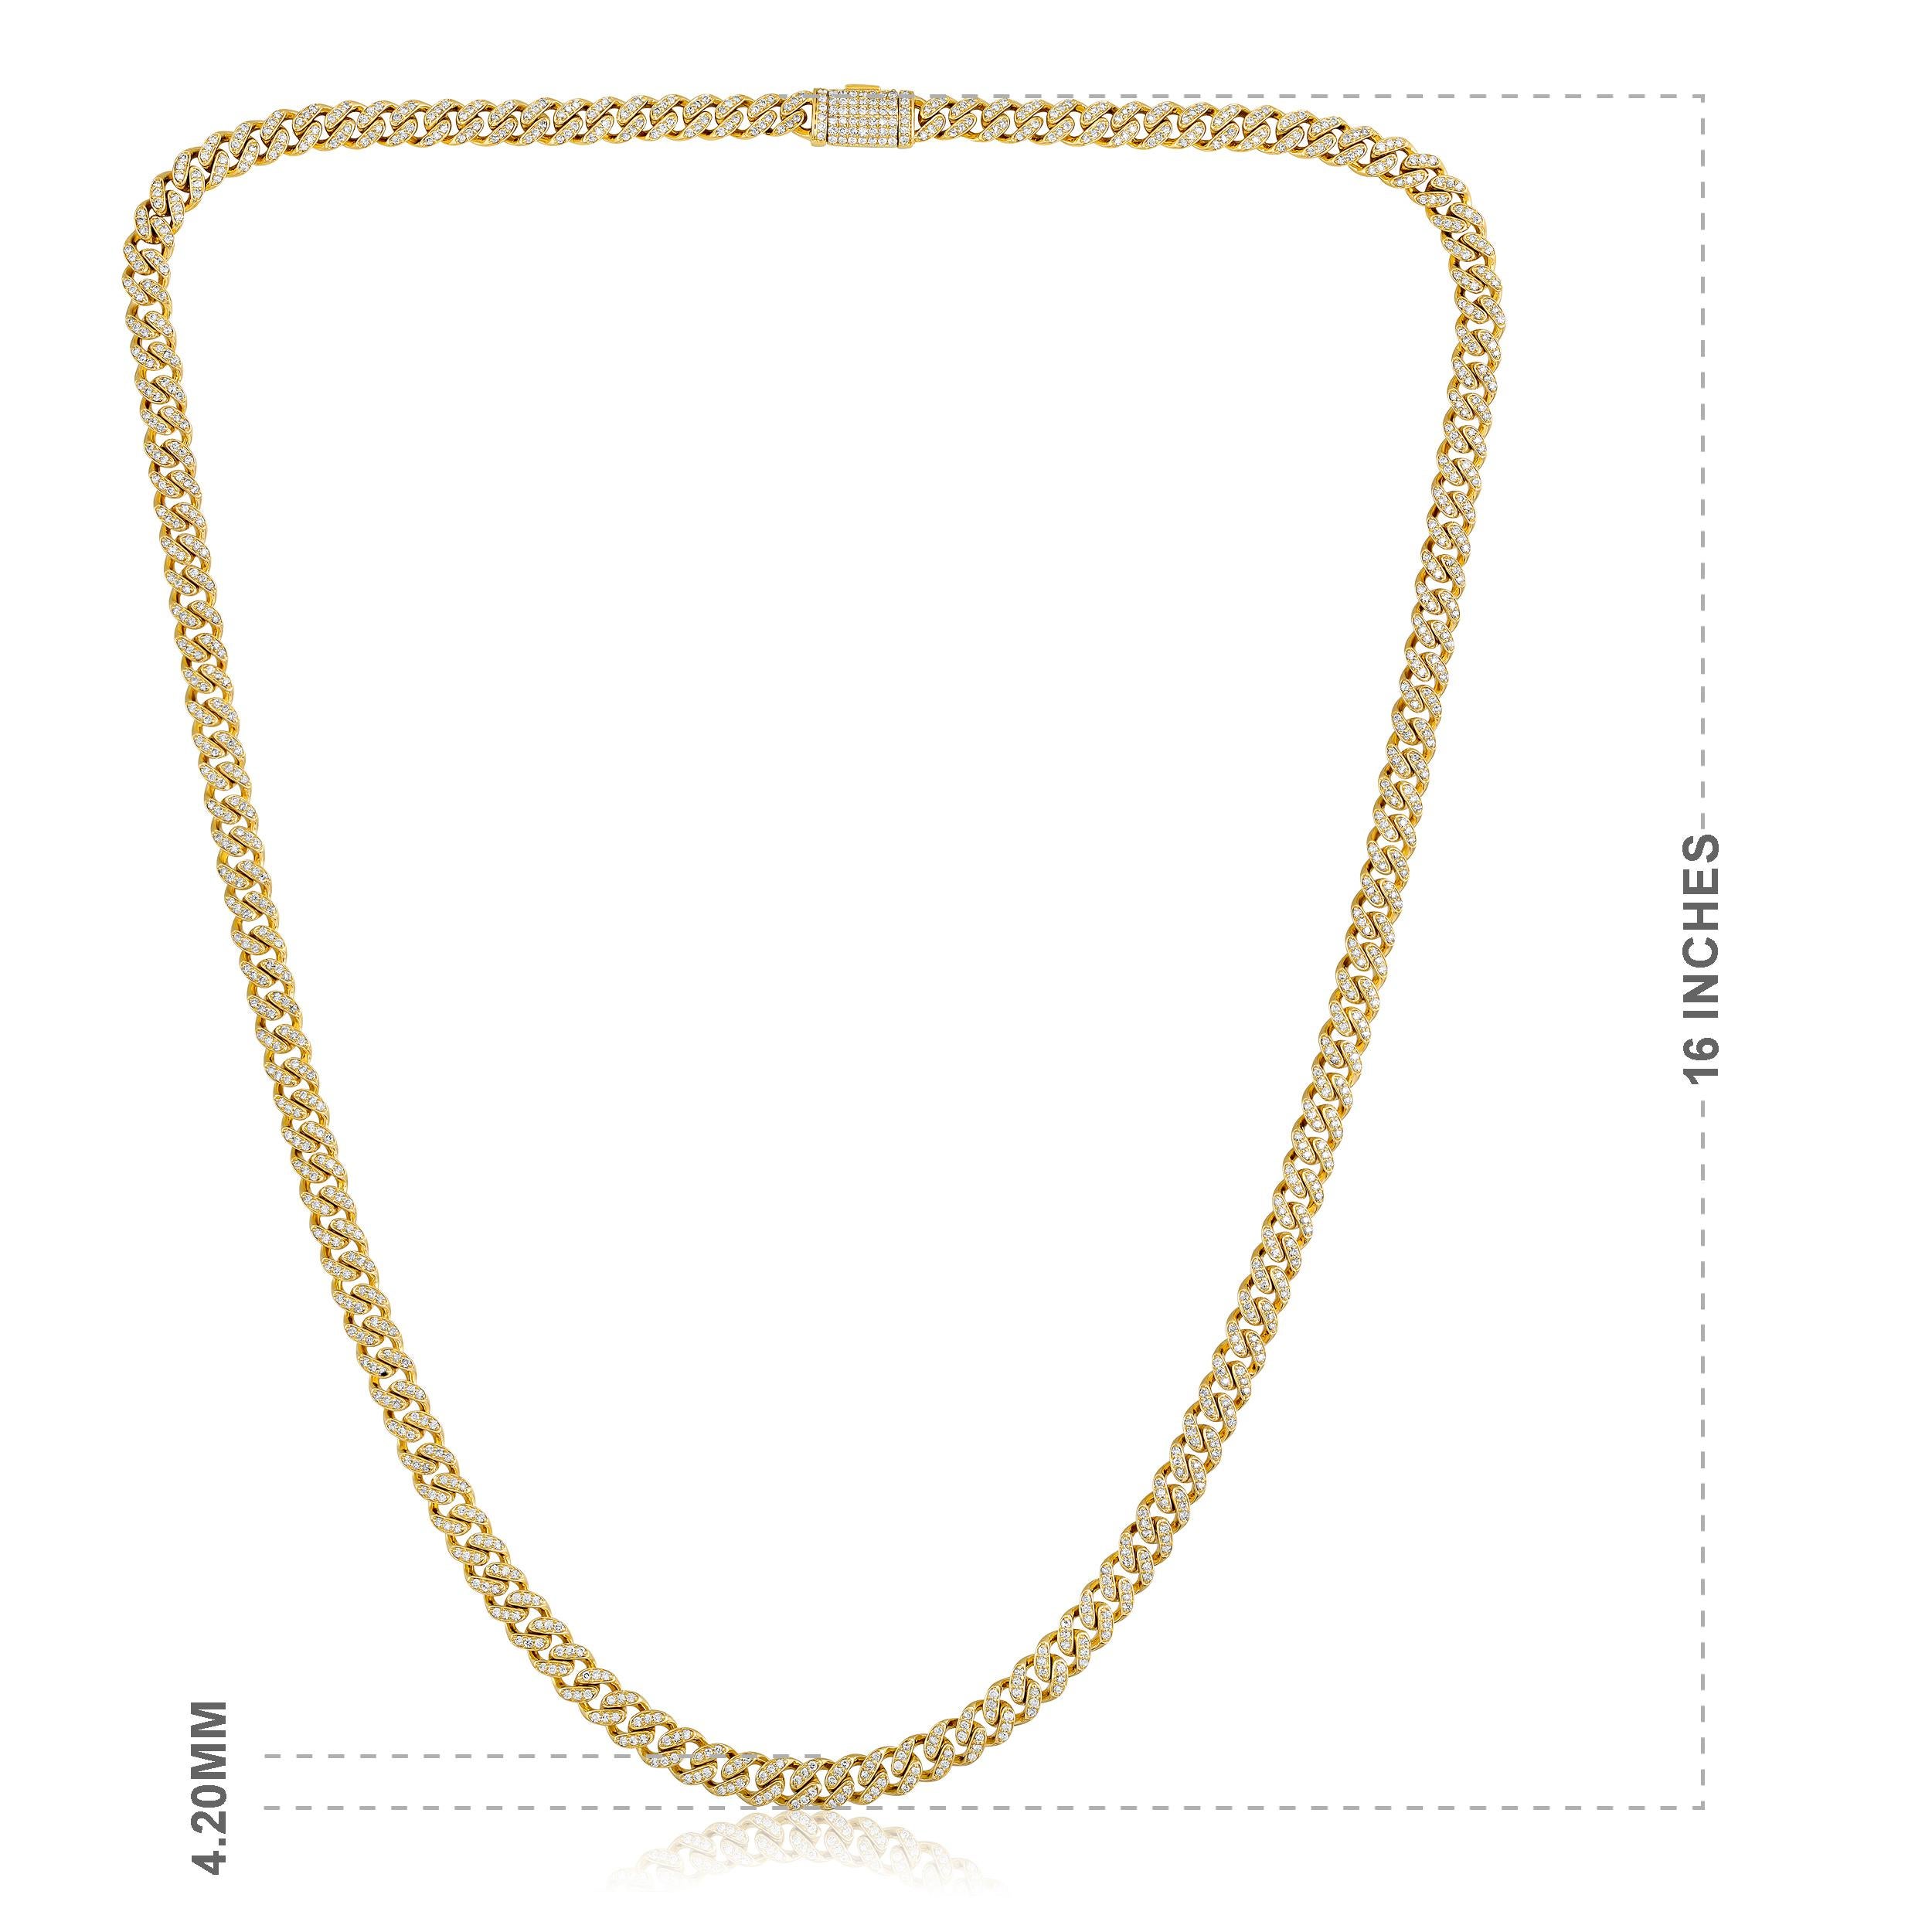 Brilliant Cut Certified 10k Gold 1.8 Carat Natural Diamond Cuban Chain Link Yellow Necklace For Sale